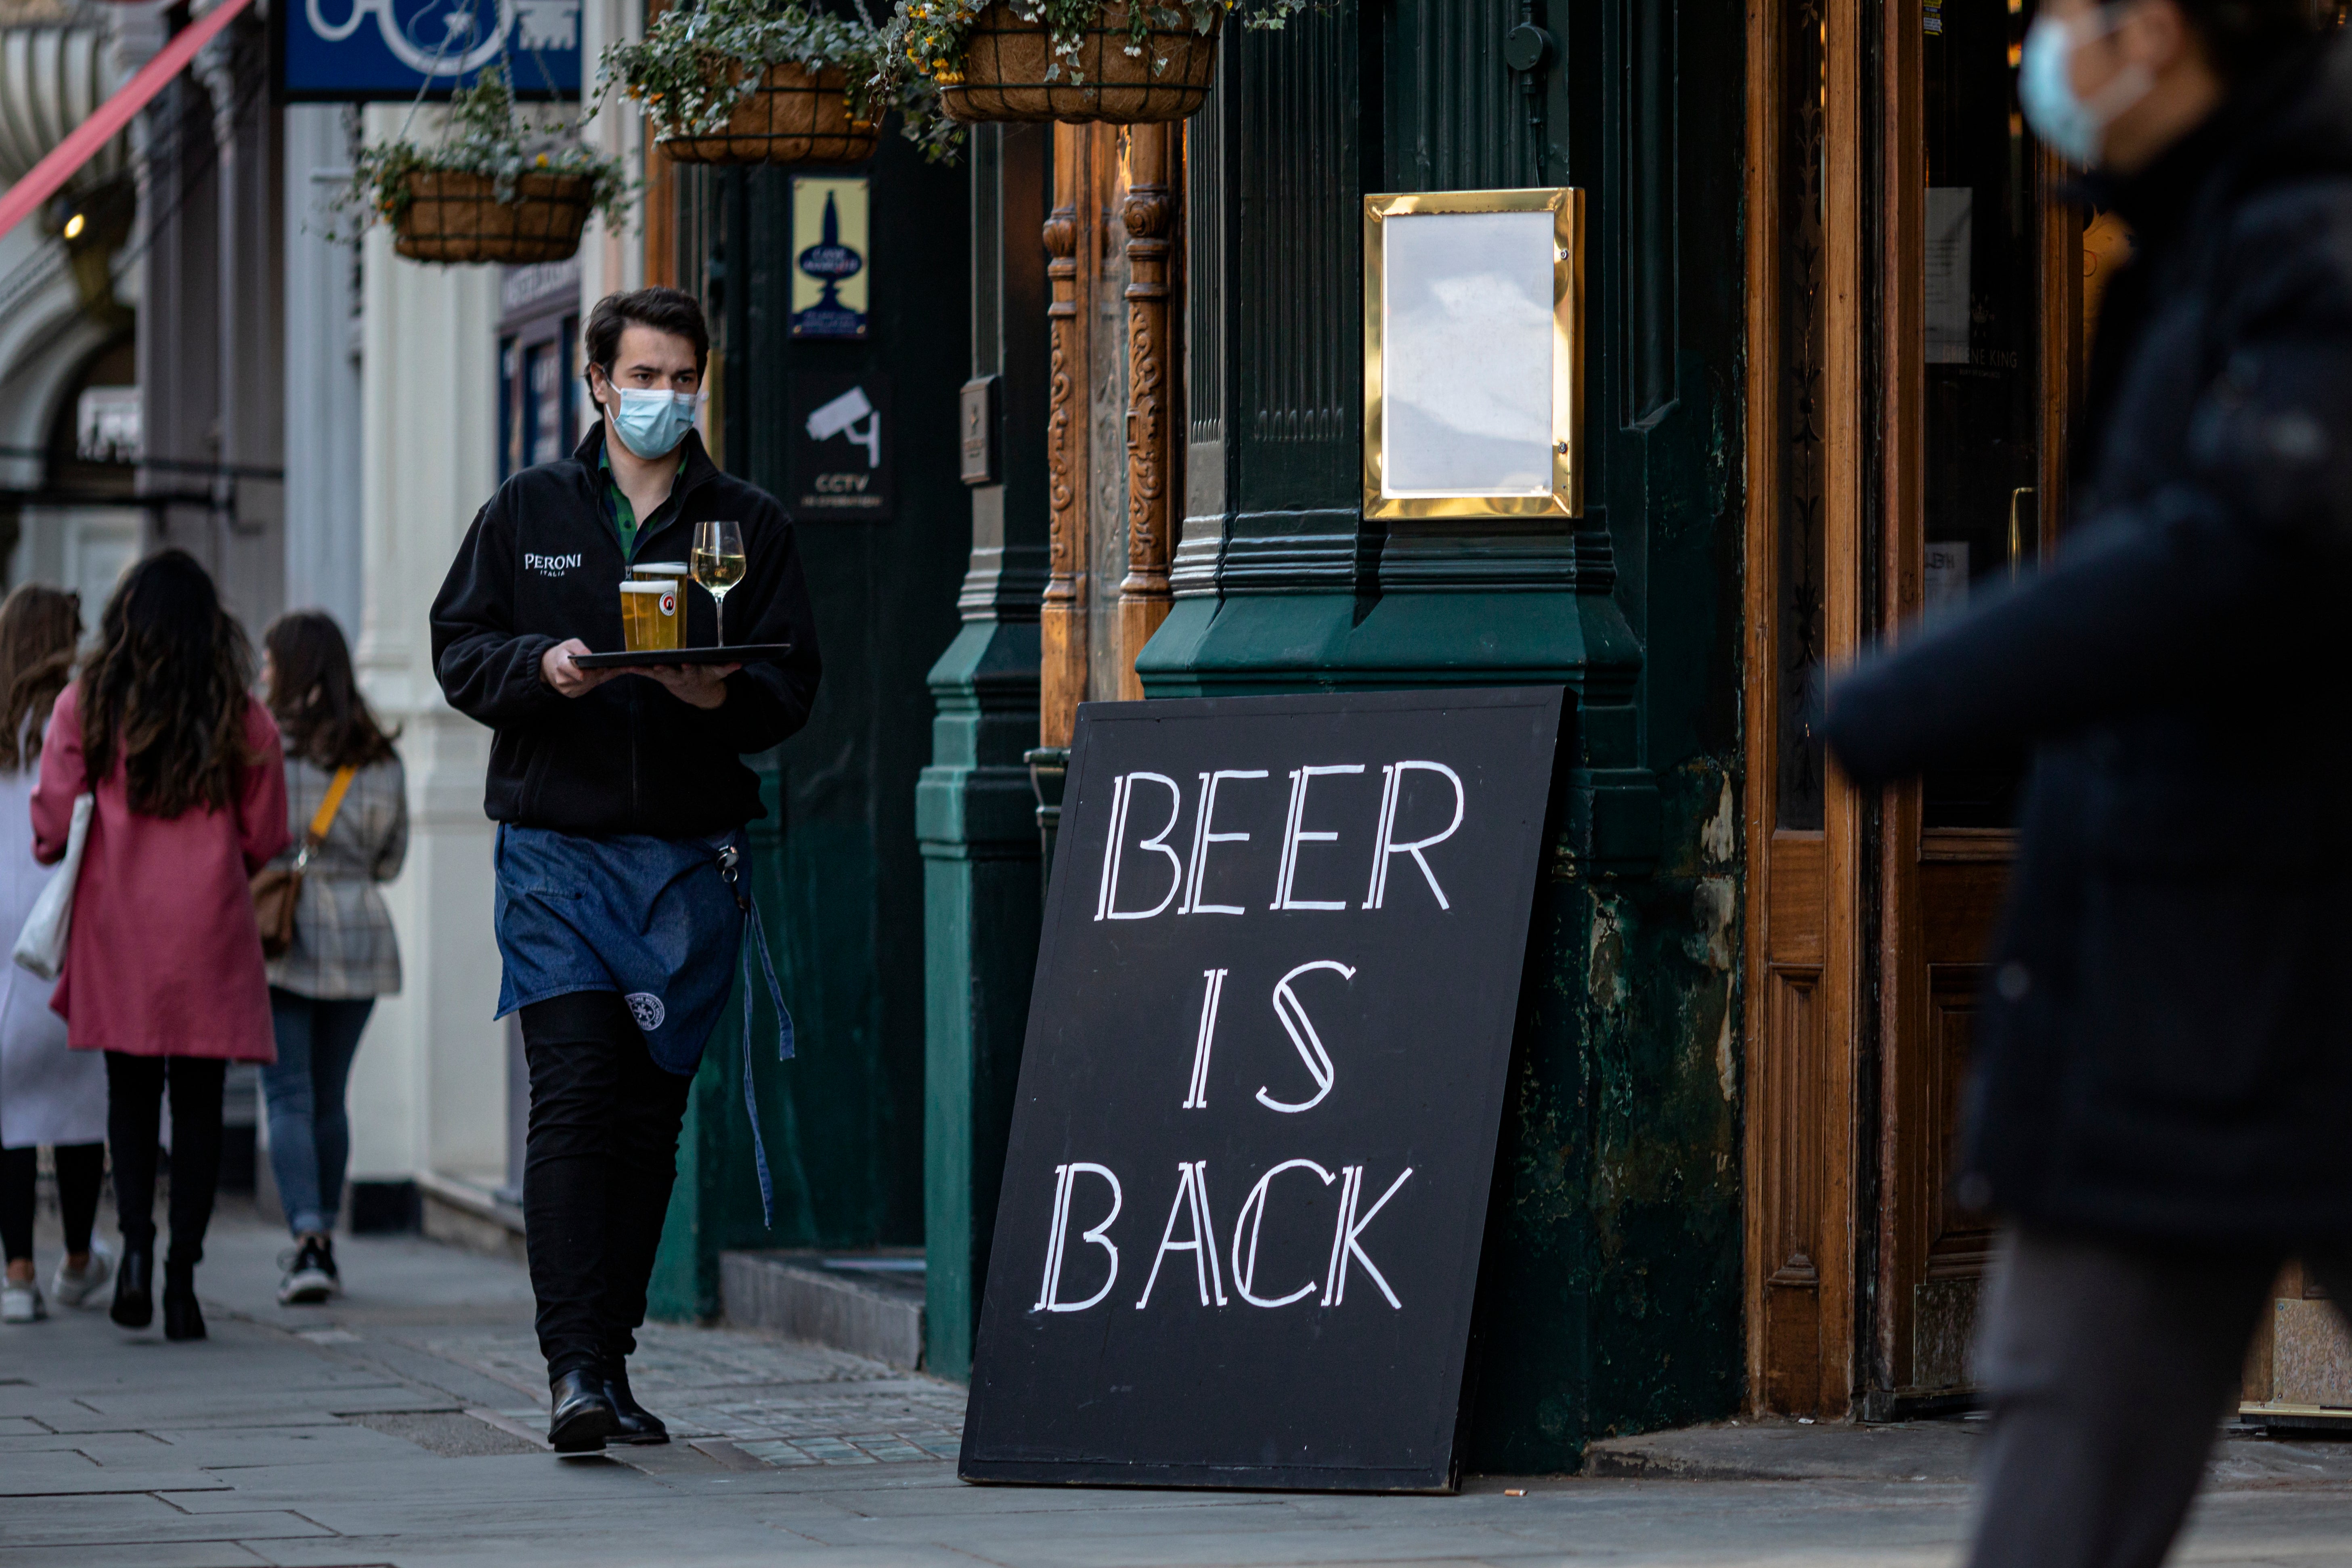 Pubs re-opened last Monday, as lockdown restrictions eased